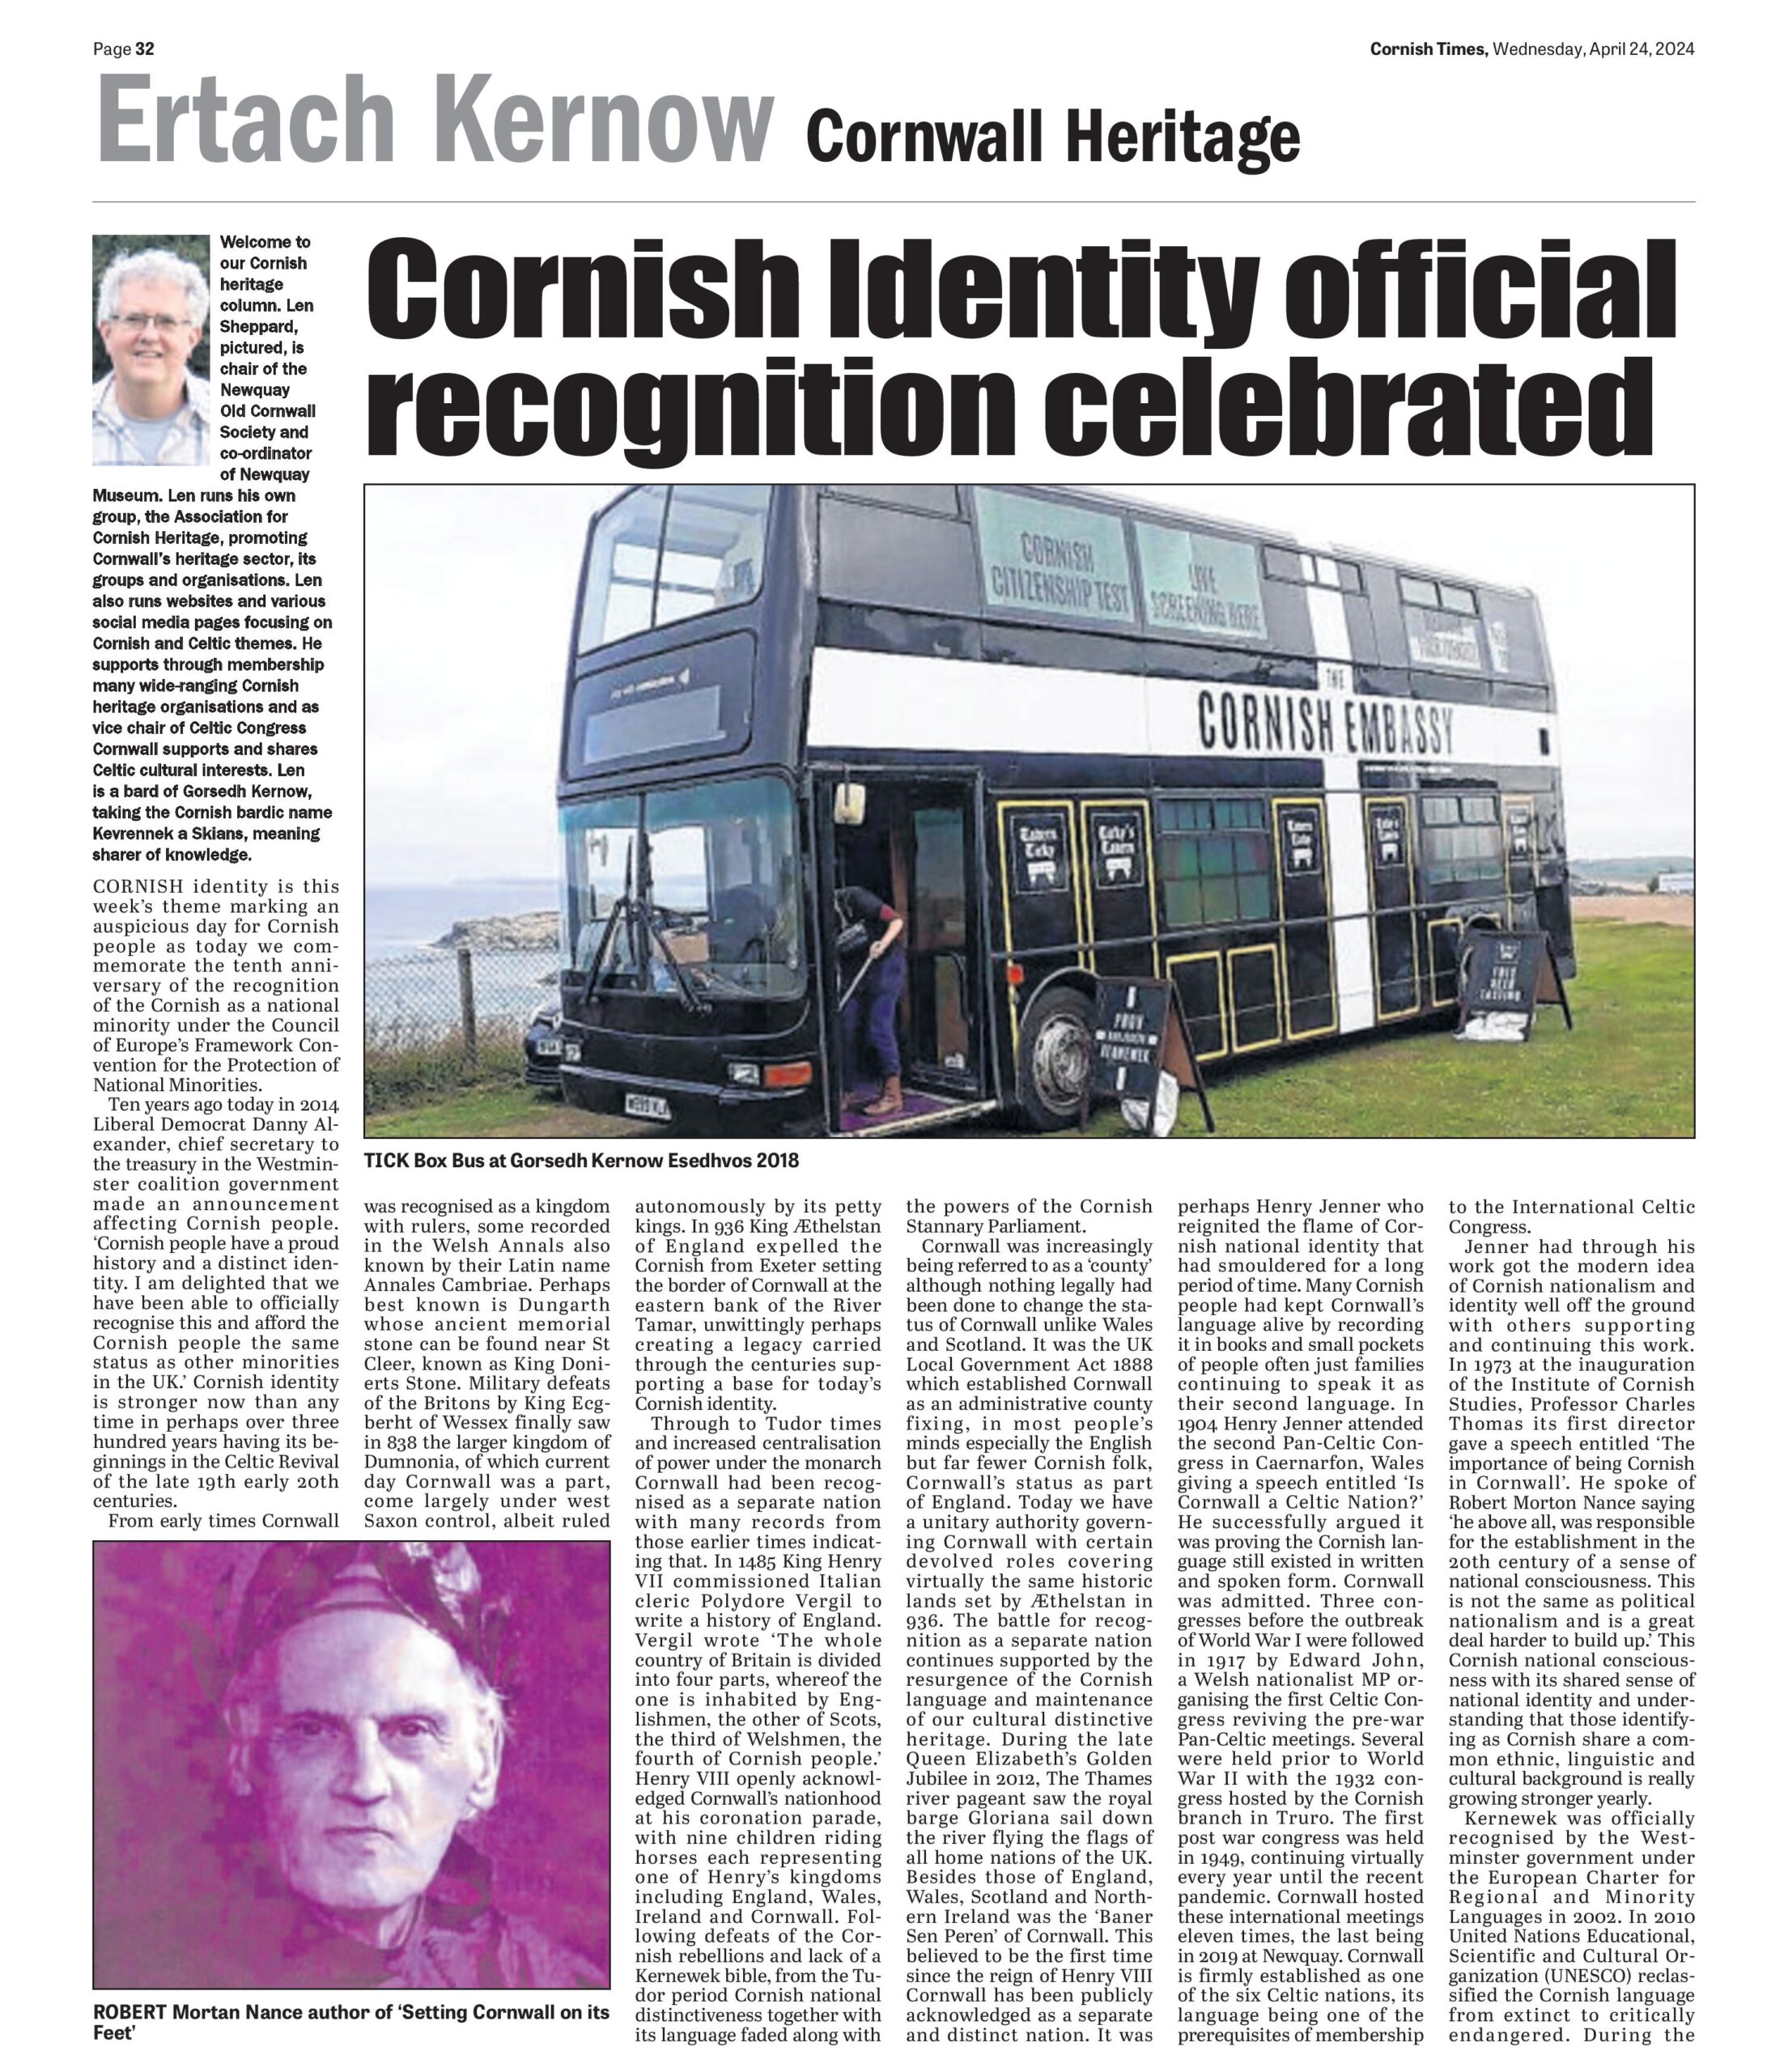 Cornish Identity Official Recognition Celebrated